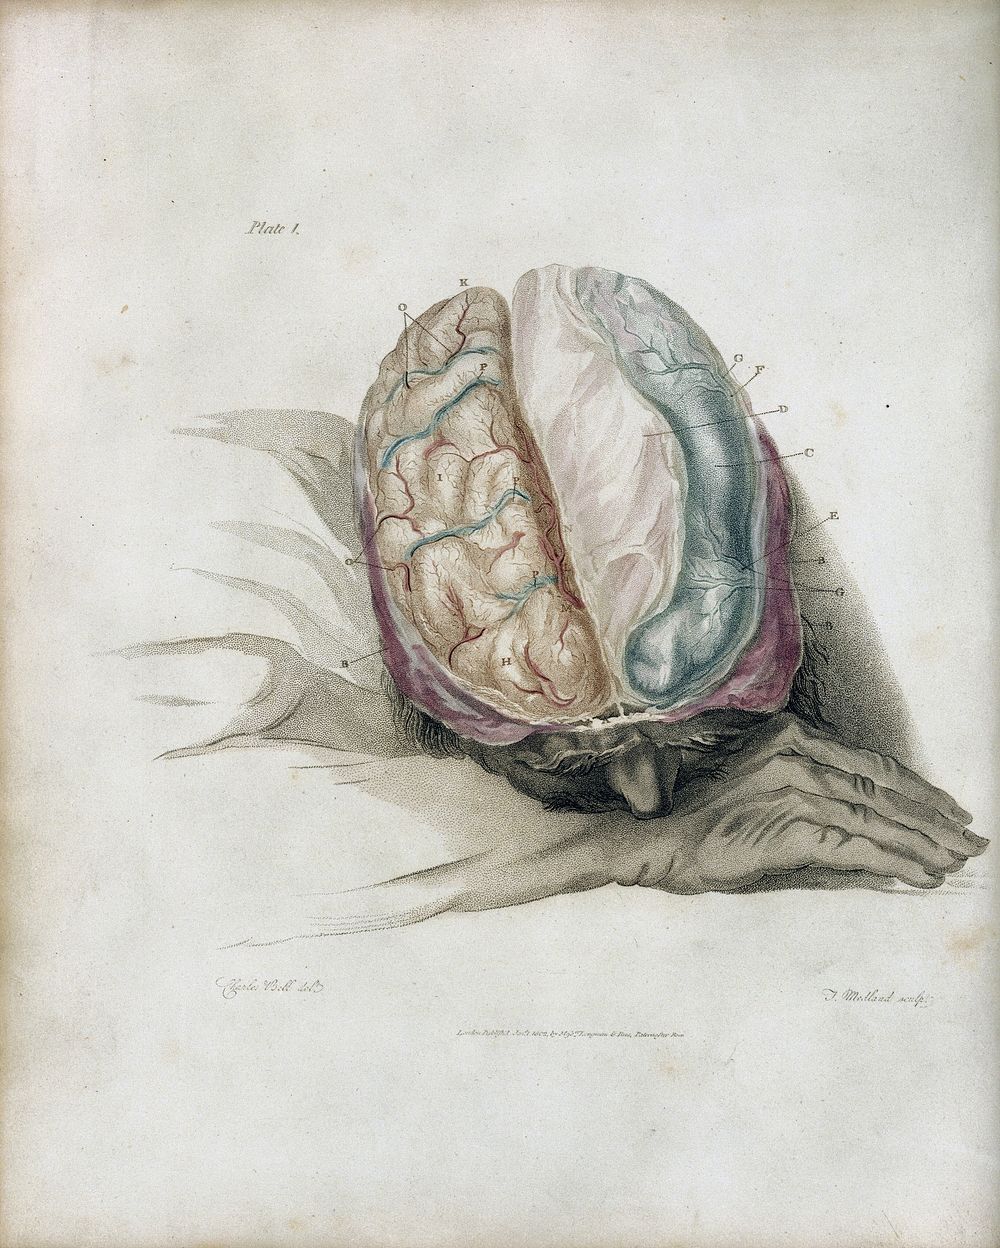 The anatomy of the brain, explained in a series of engravings / By Charles Bell.